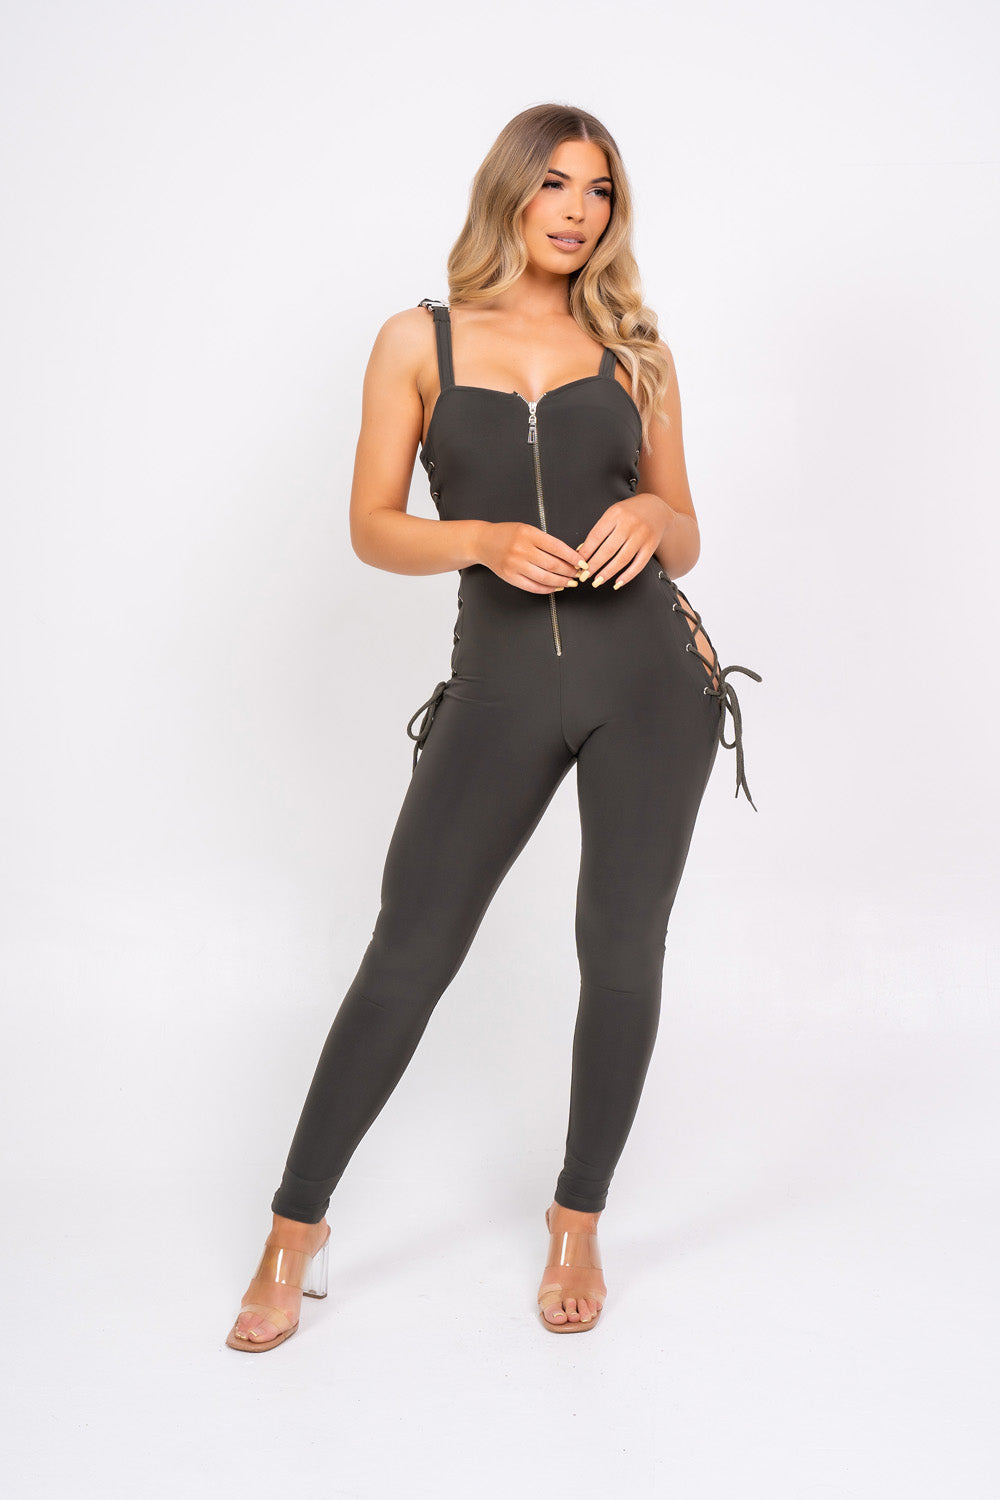 Snatched Khaki Sculpted Cut Out Rope Tie Side Jumpsuit Romper